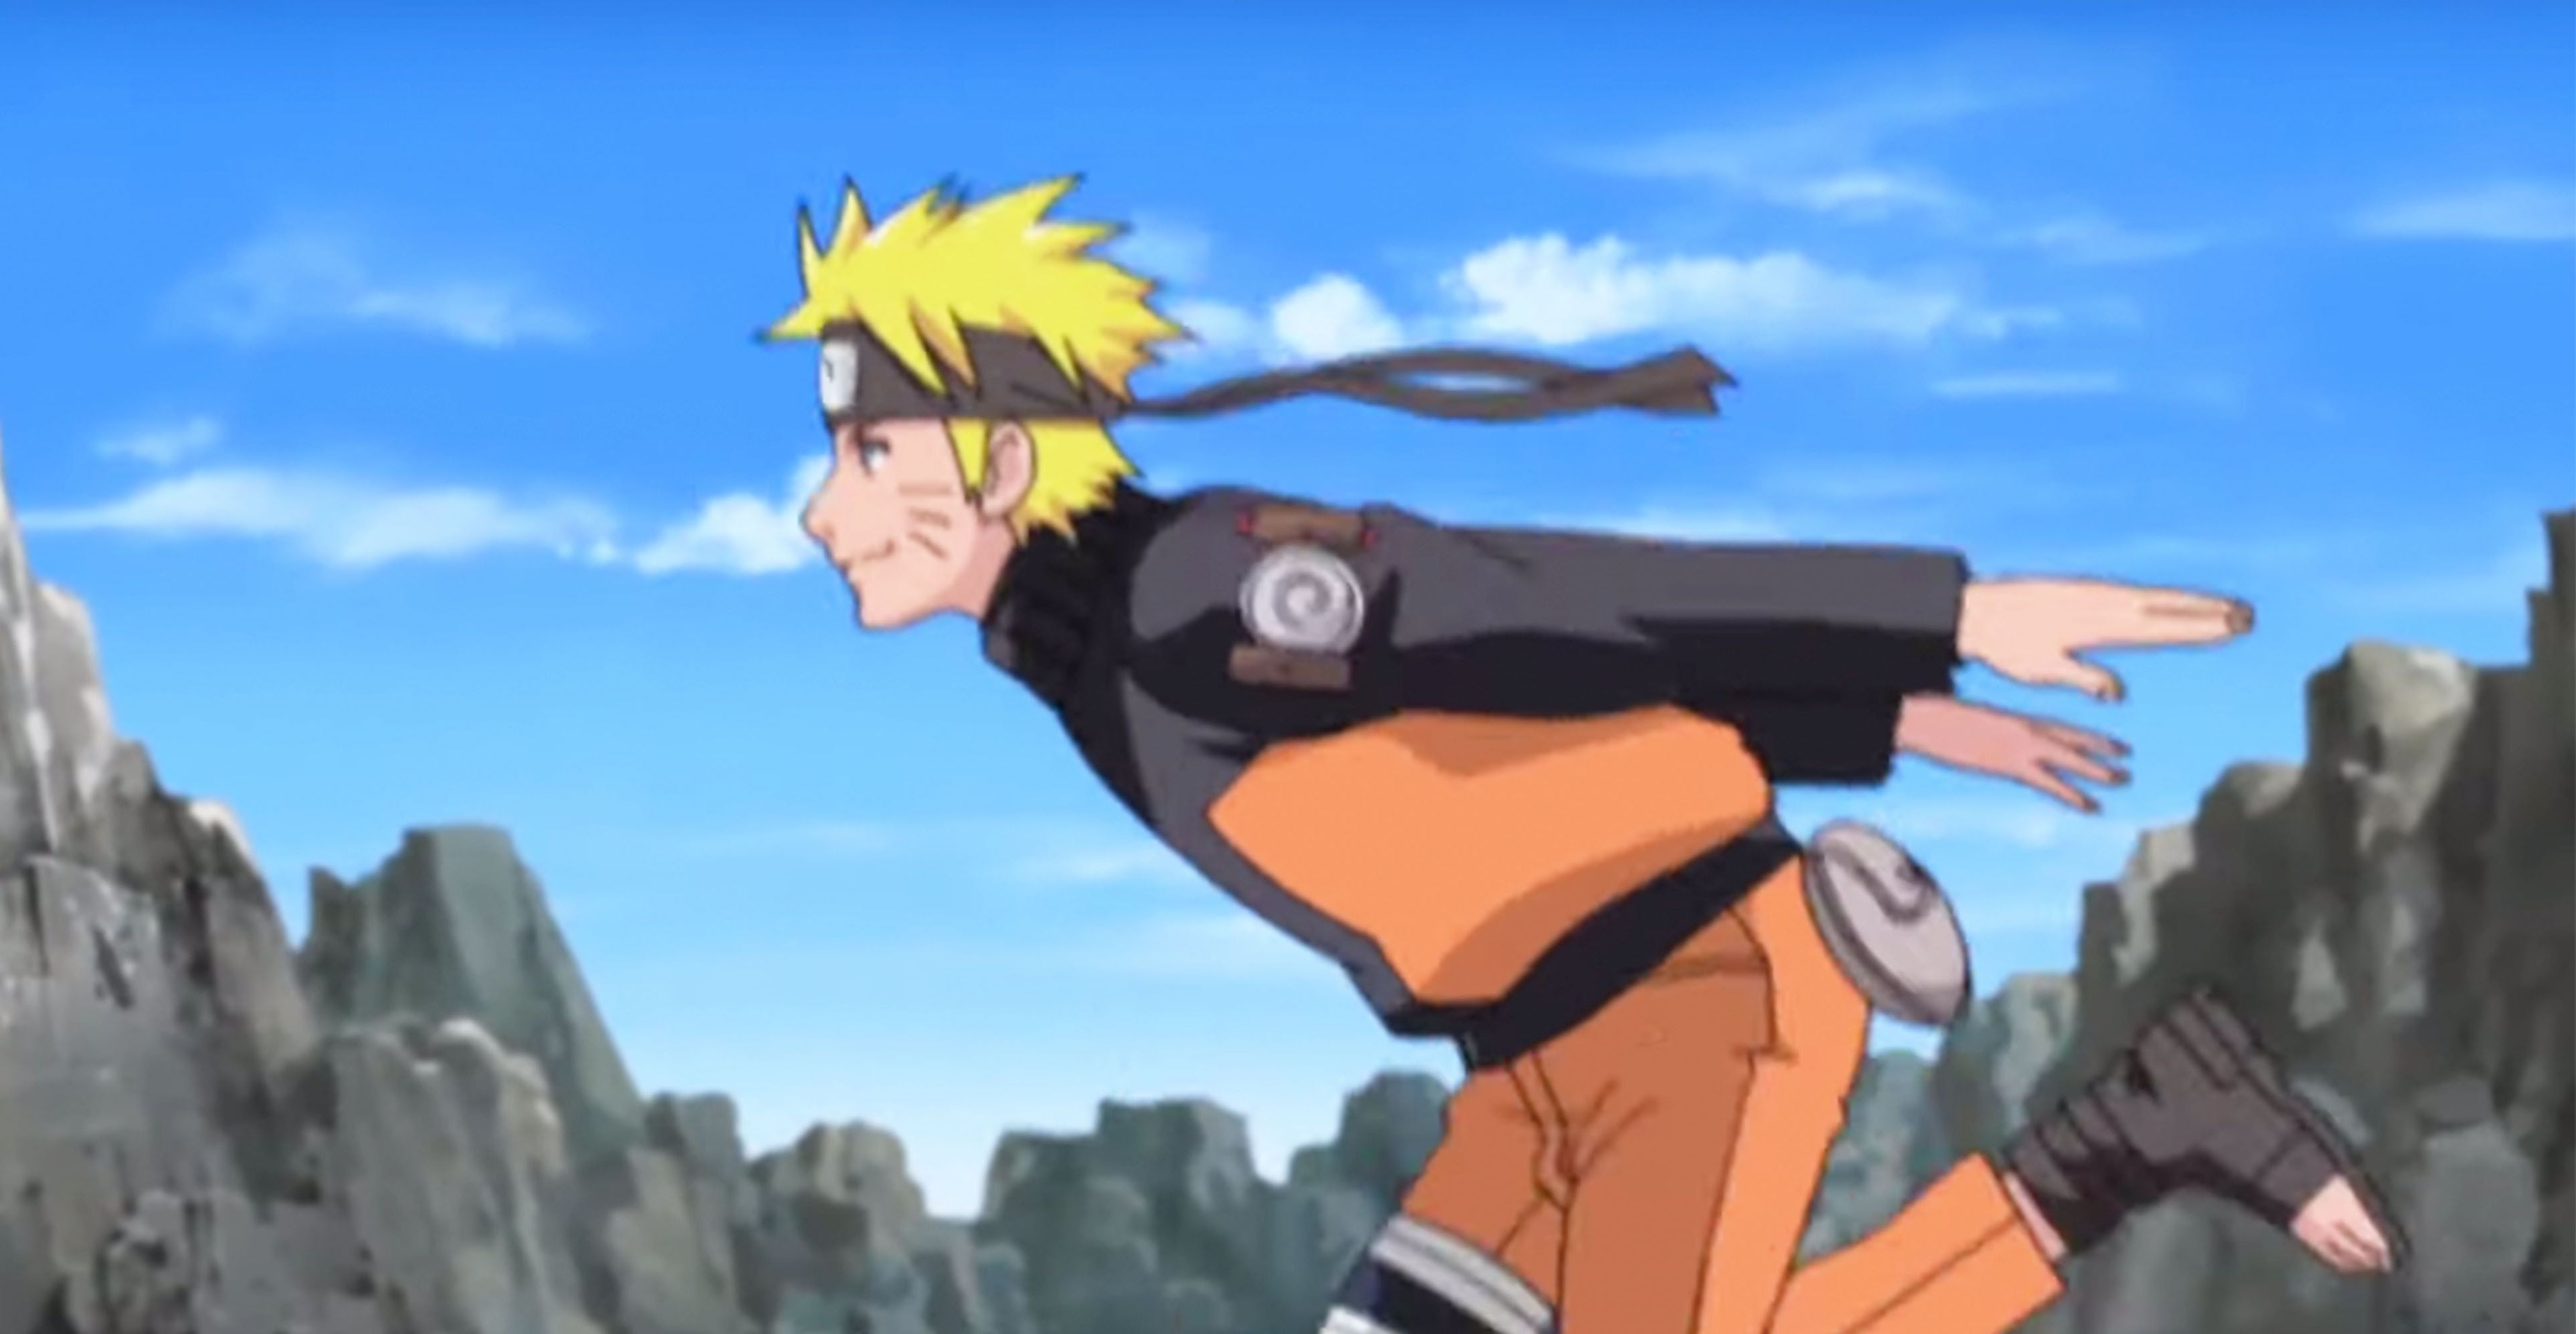 Naruto run explained: What is it and what does it have to do